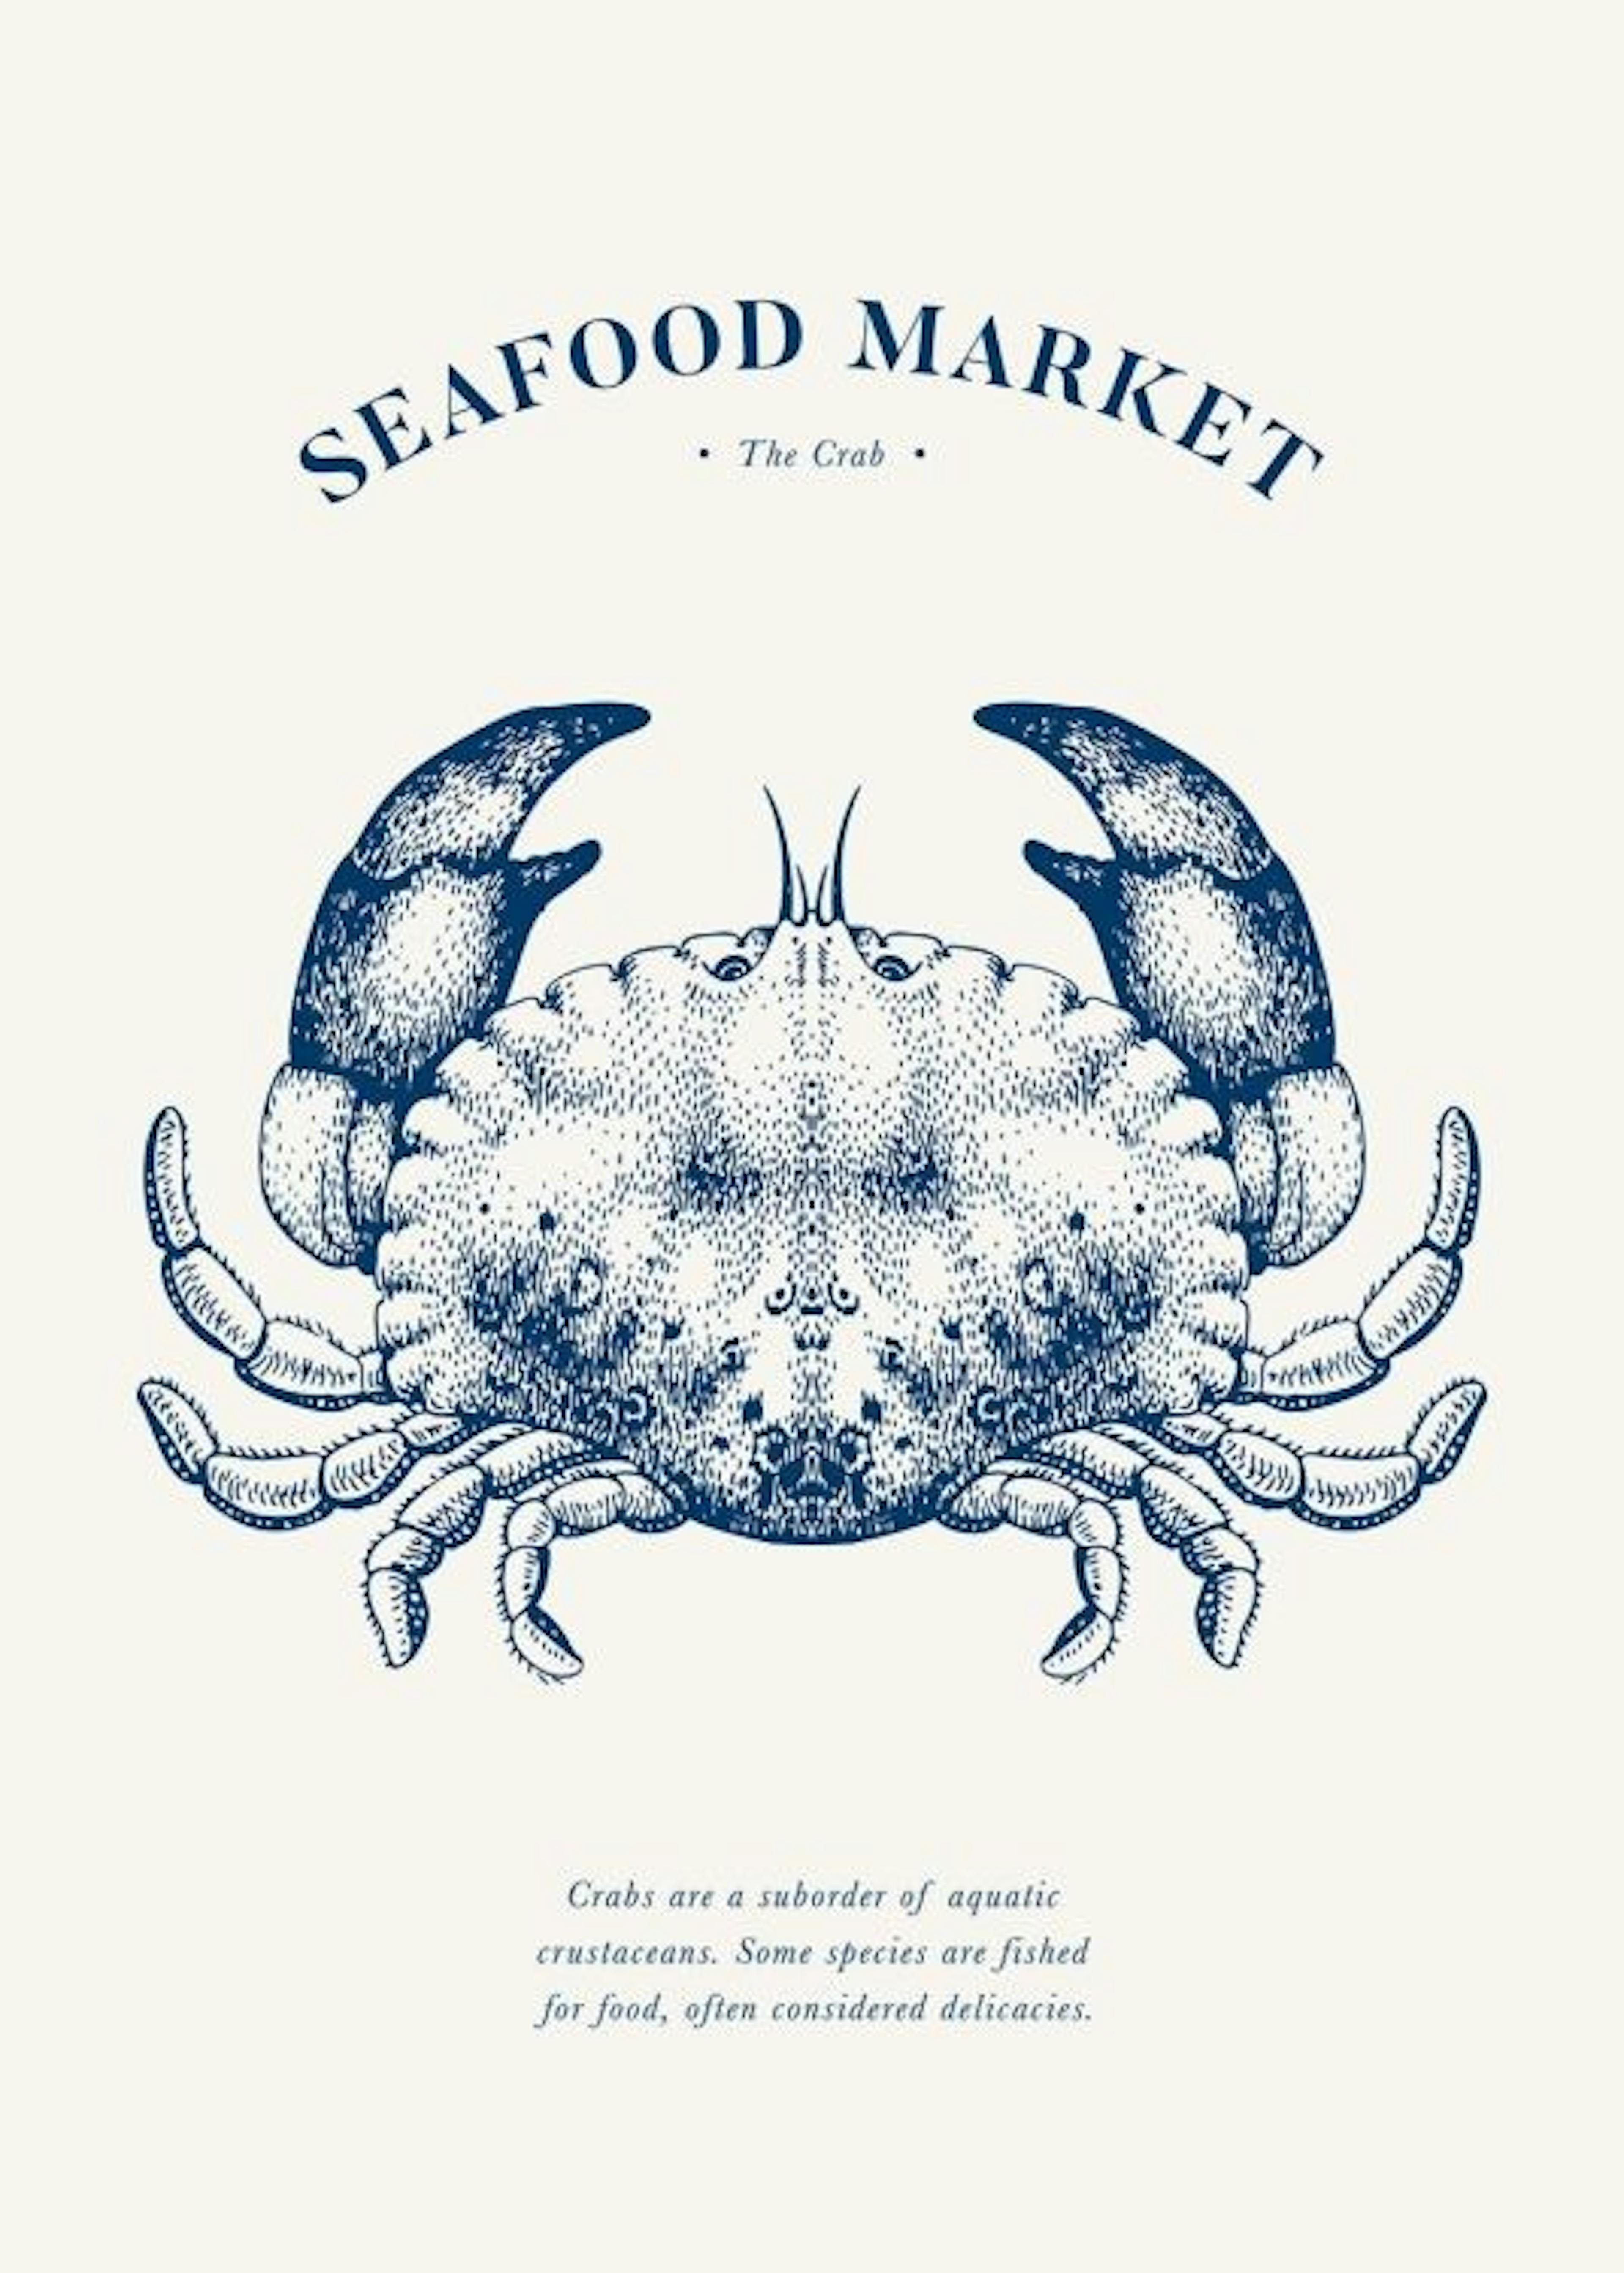 Seafood Market - The Crab Affiche 0